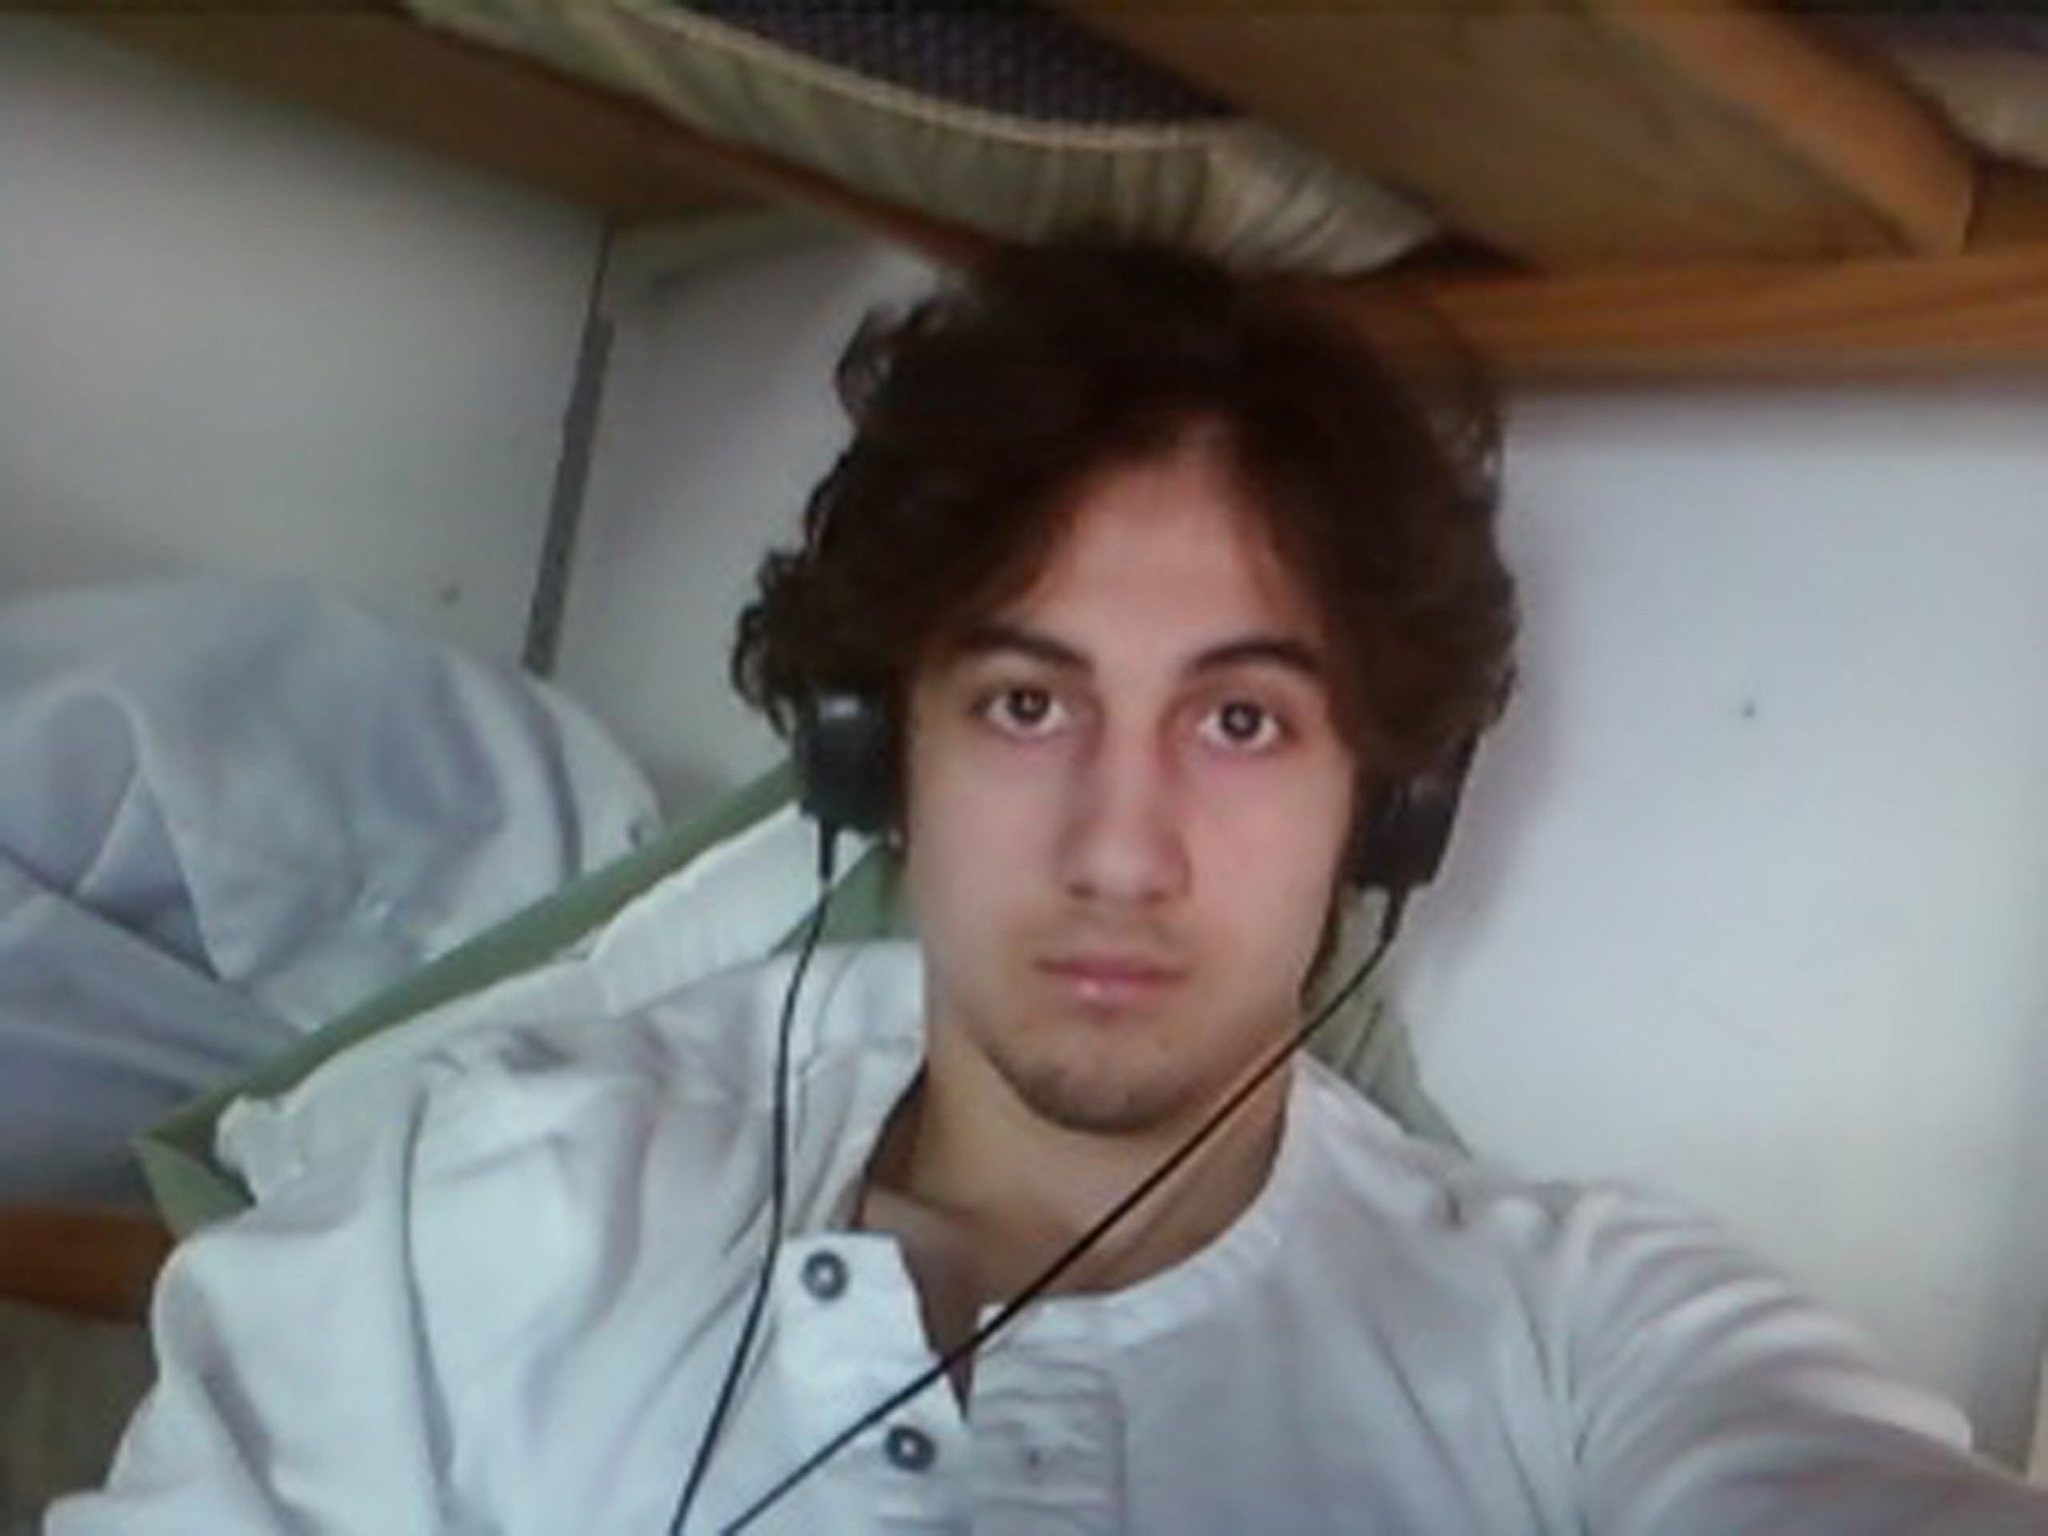 This handout image, courtesy of the US Department of Justice/US Attorneyu2019s Office u2013 District of Massachusetts shows Dzhokhar Tsarnaev, convicted bomber of the Boston Marathon on April 15, 2013. (AFP Photo)